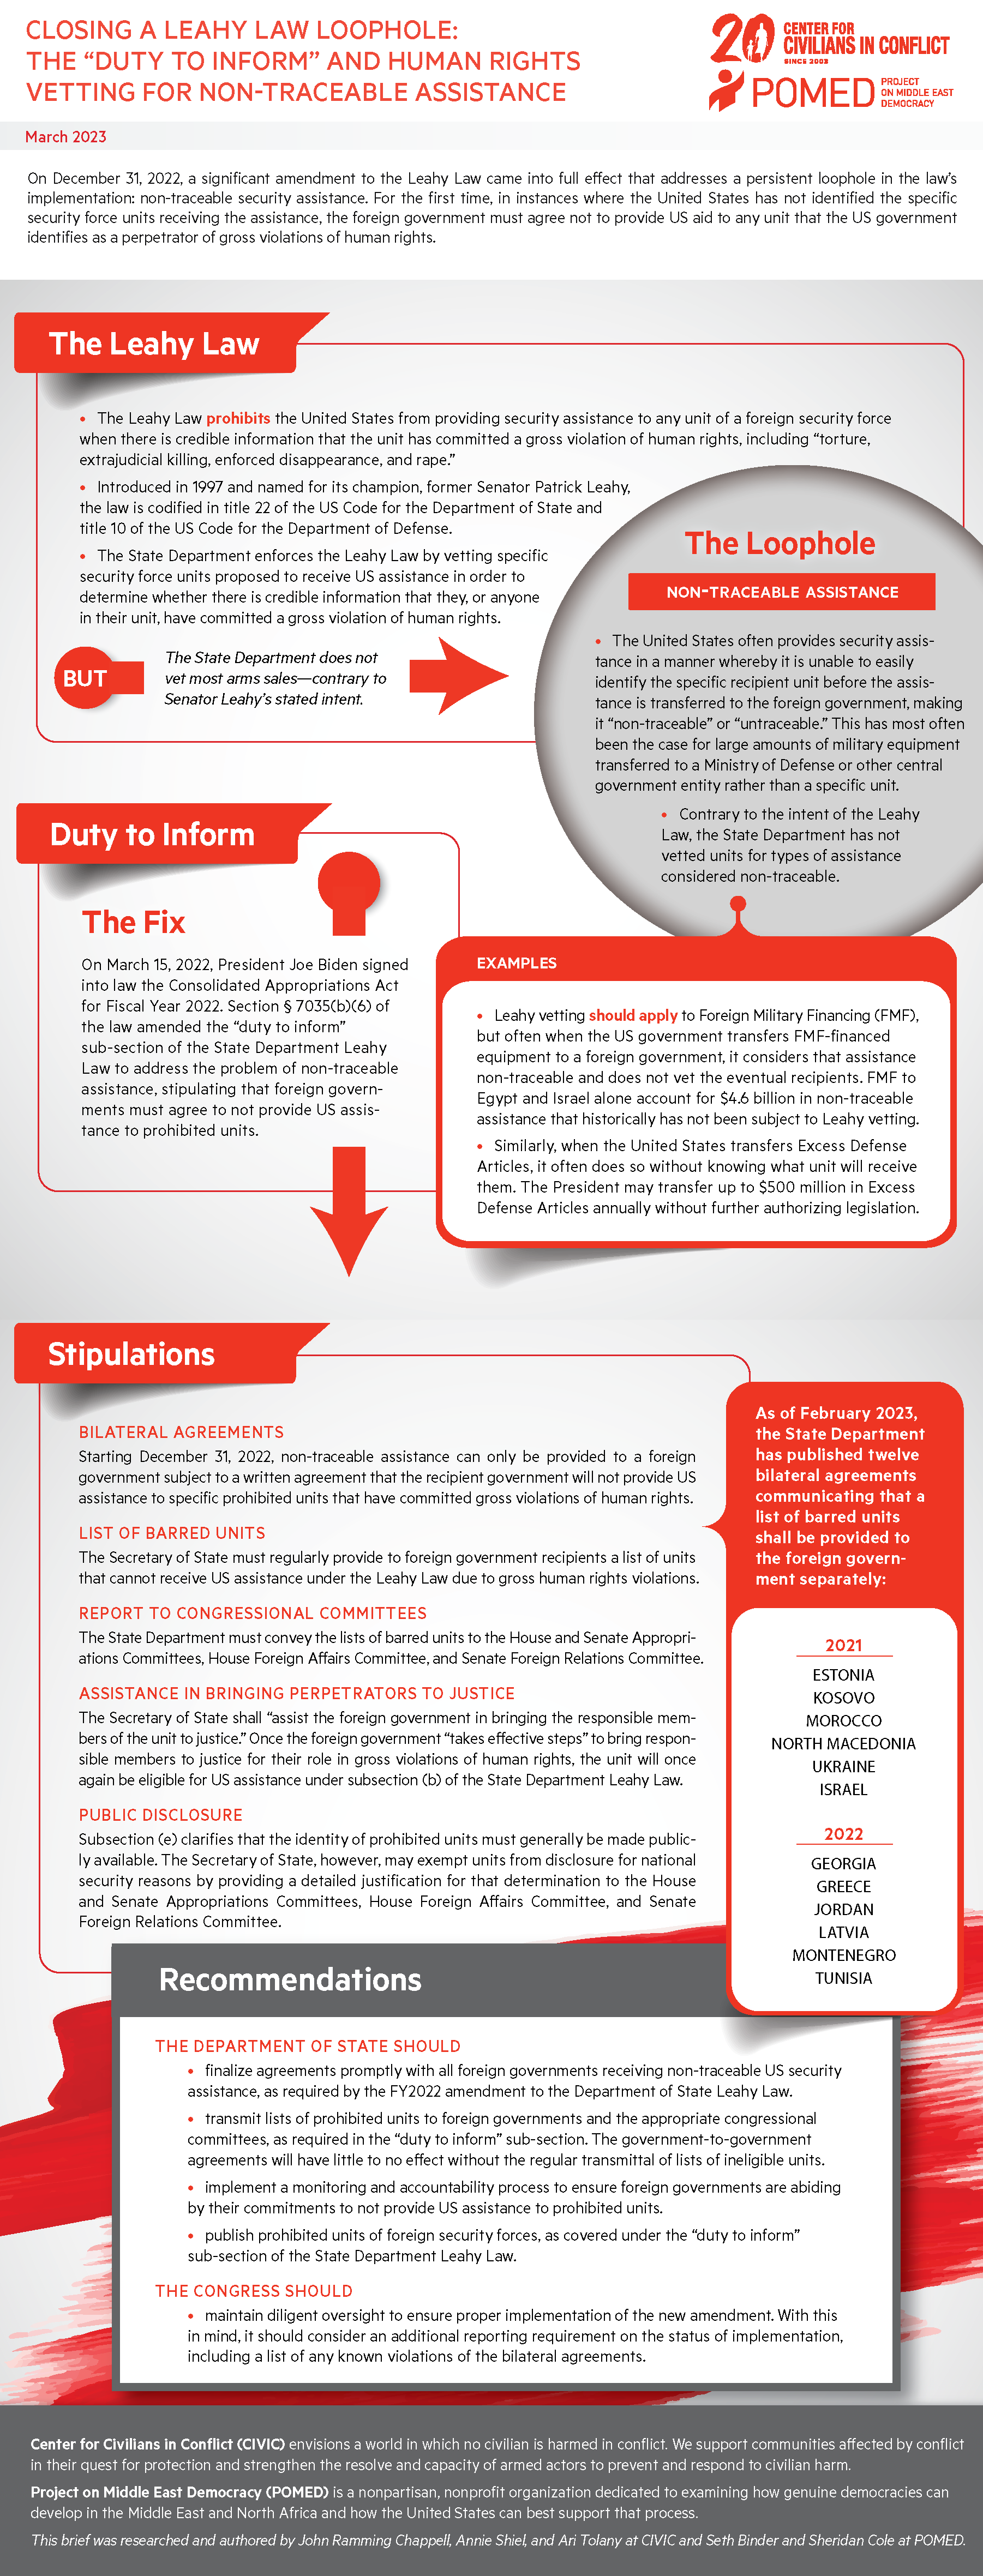 Fact Sheet - Closing a Leahy Law Loophole: The "Duty to Inform" and Human Rights Vetting for Non-Traceable Assistance